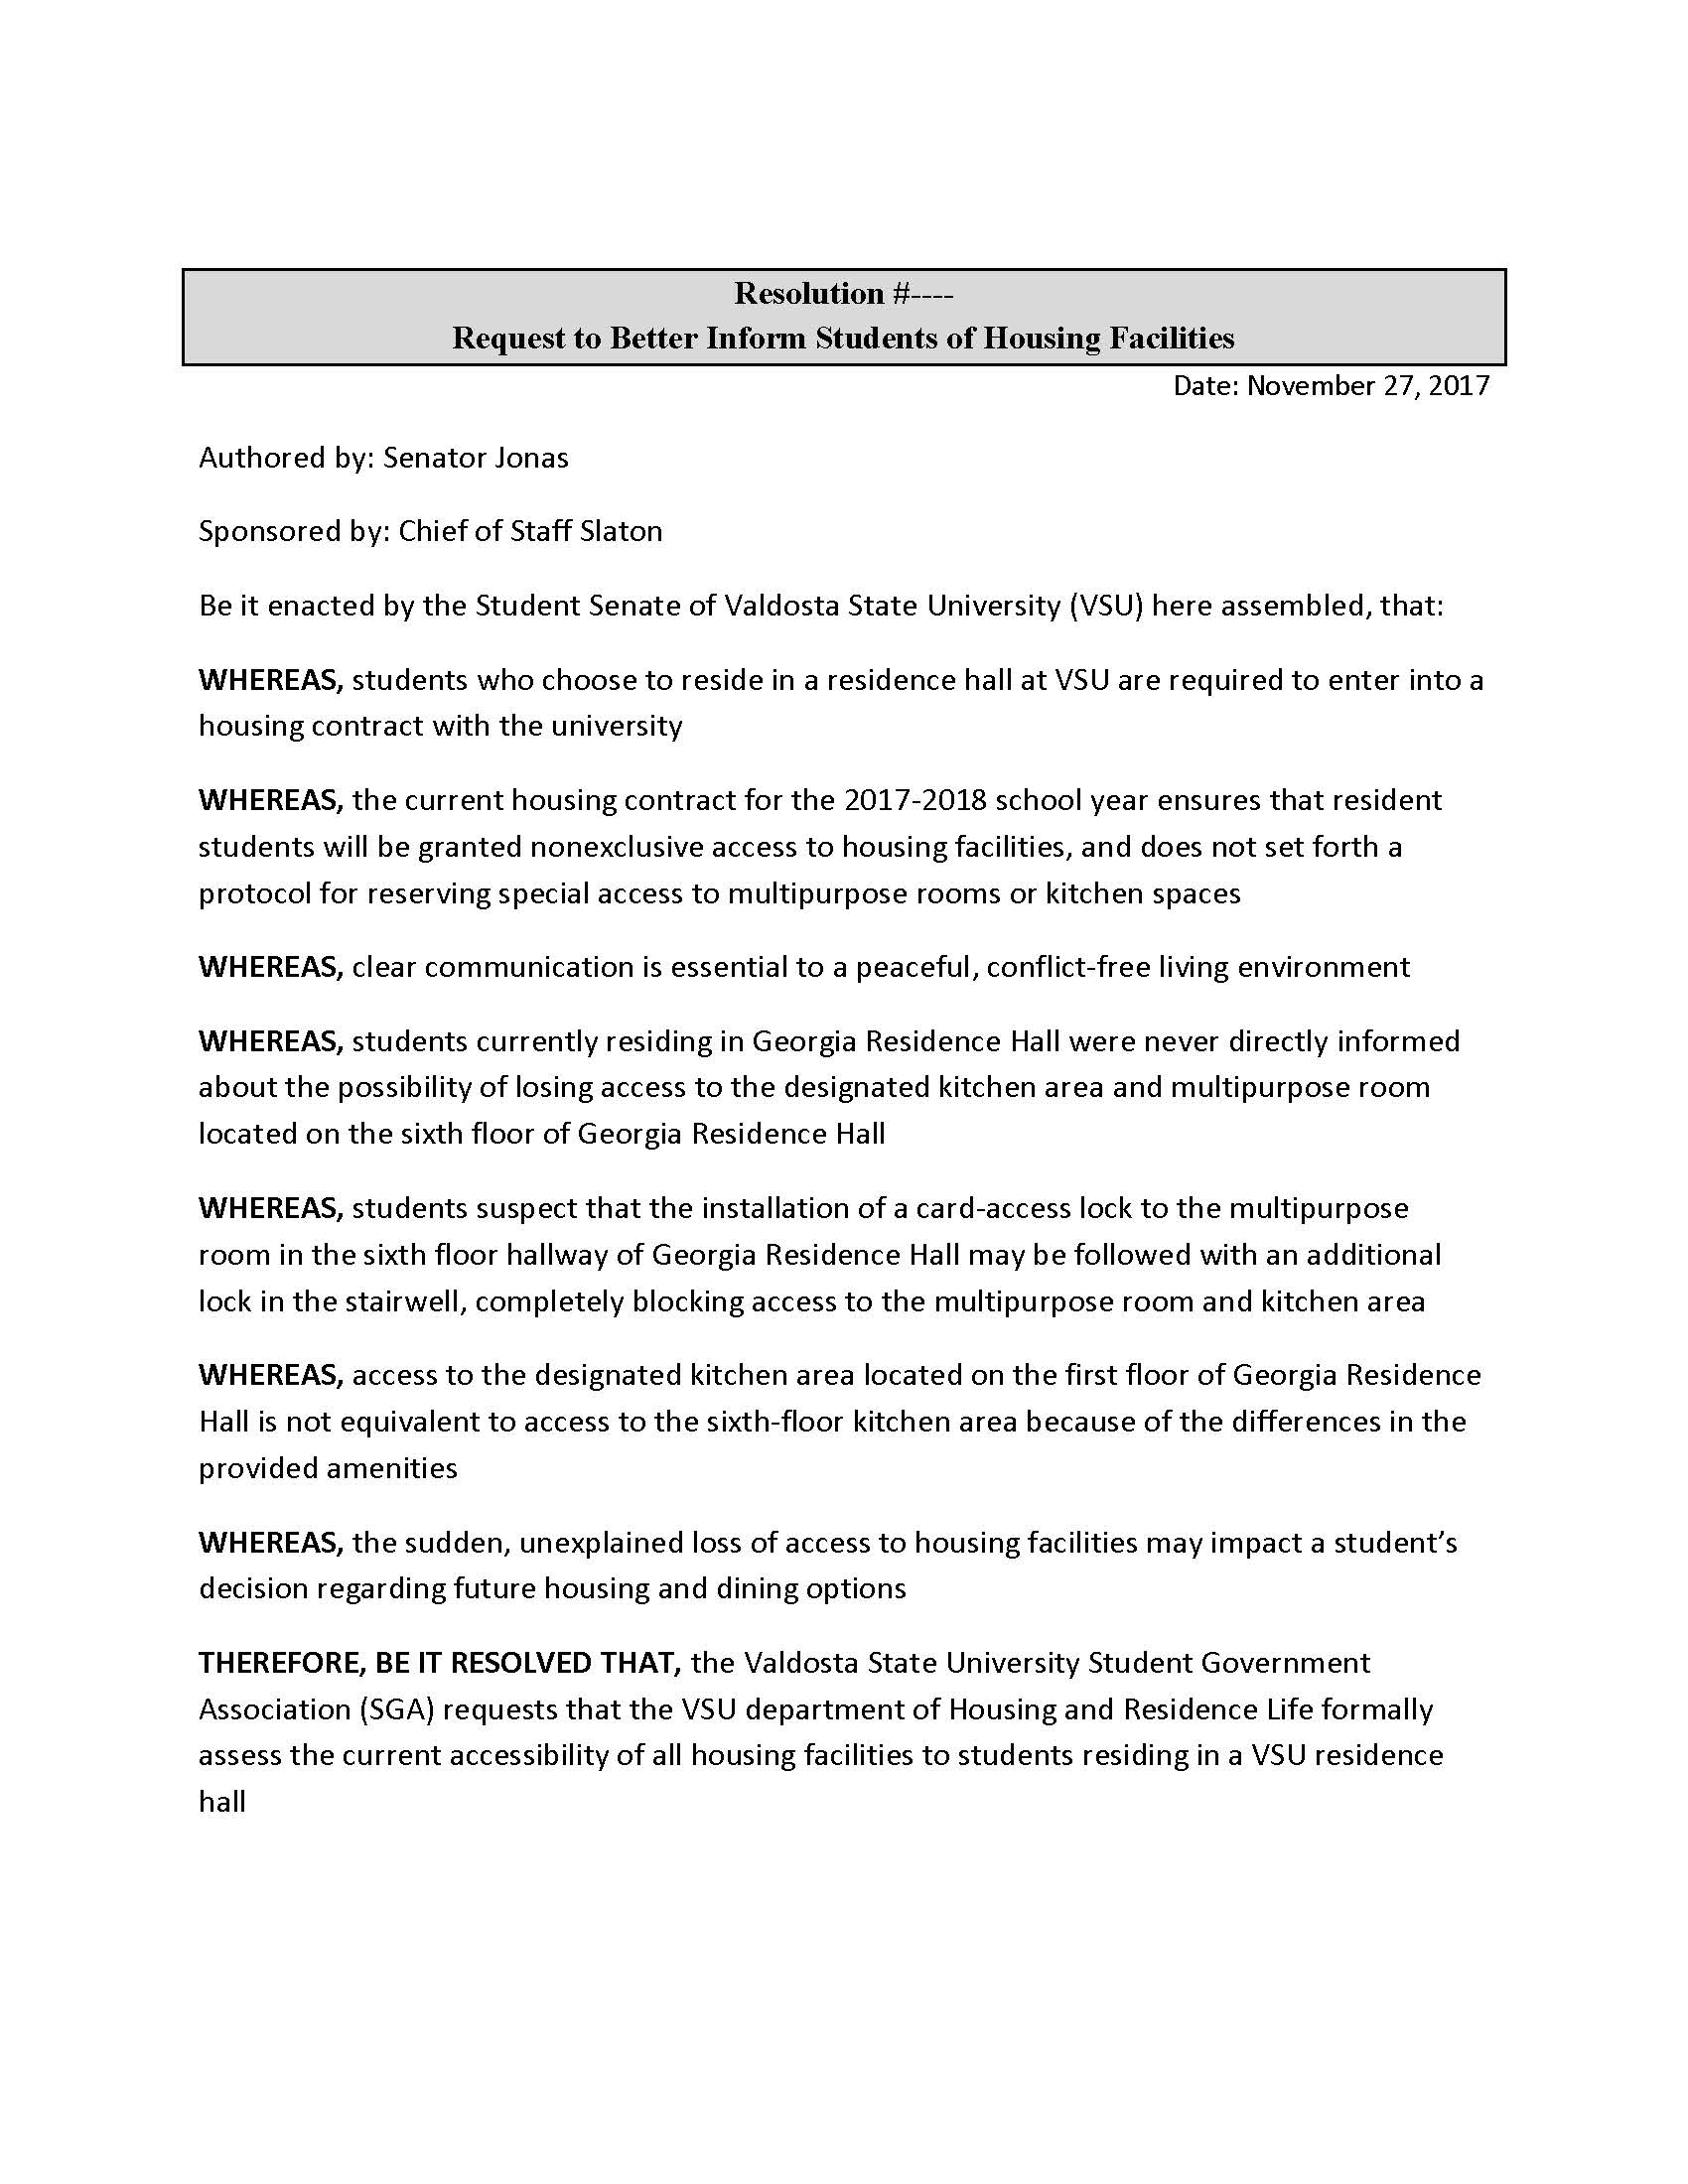 Housing resolution_Page_1